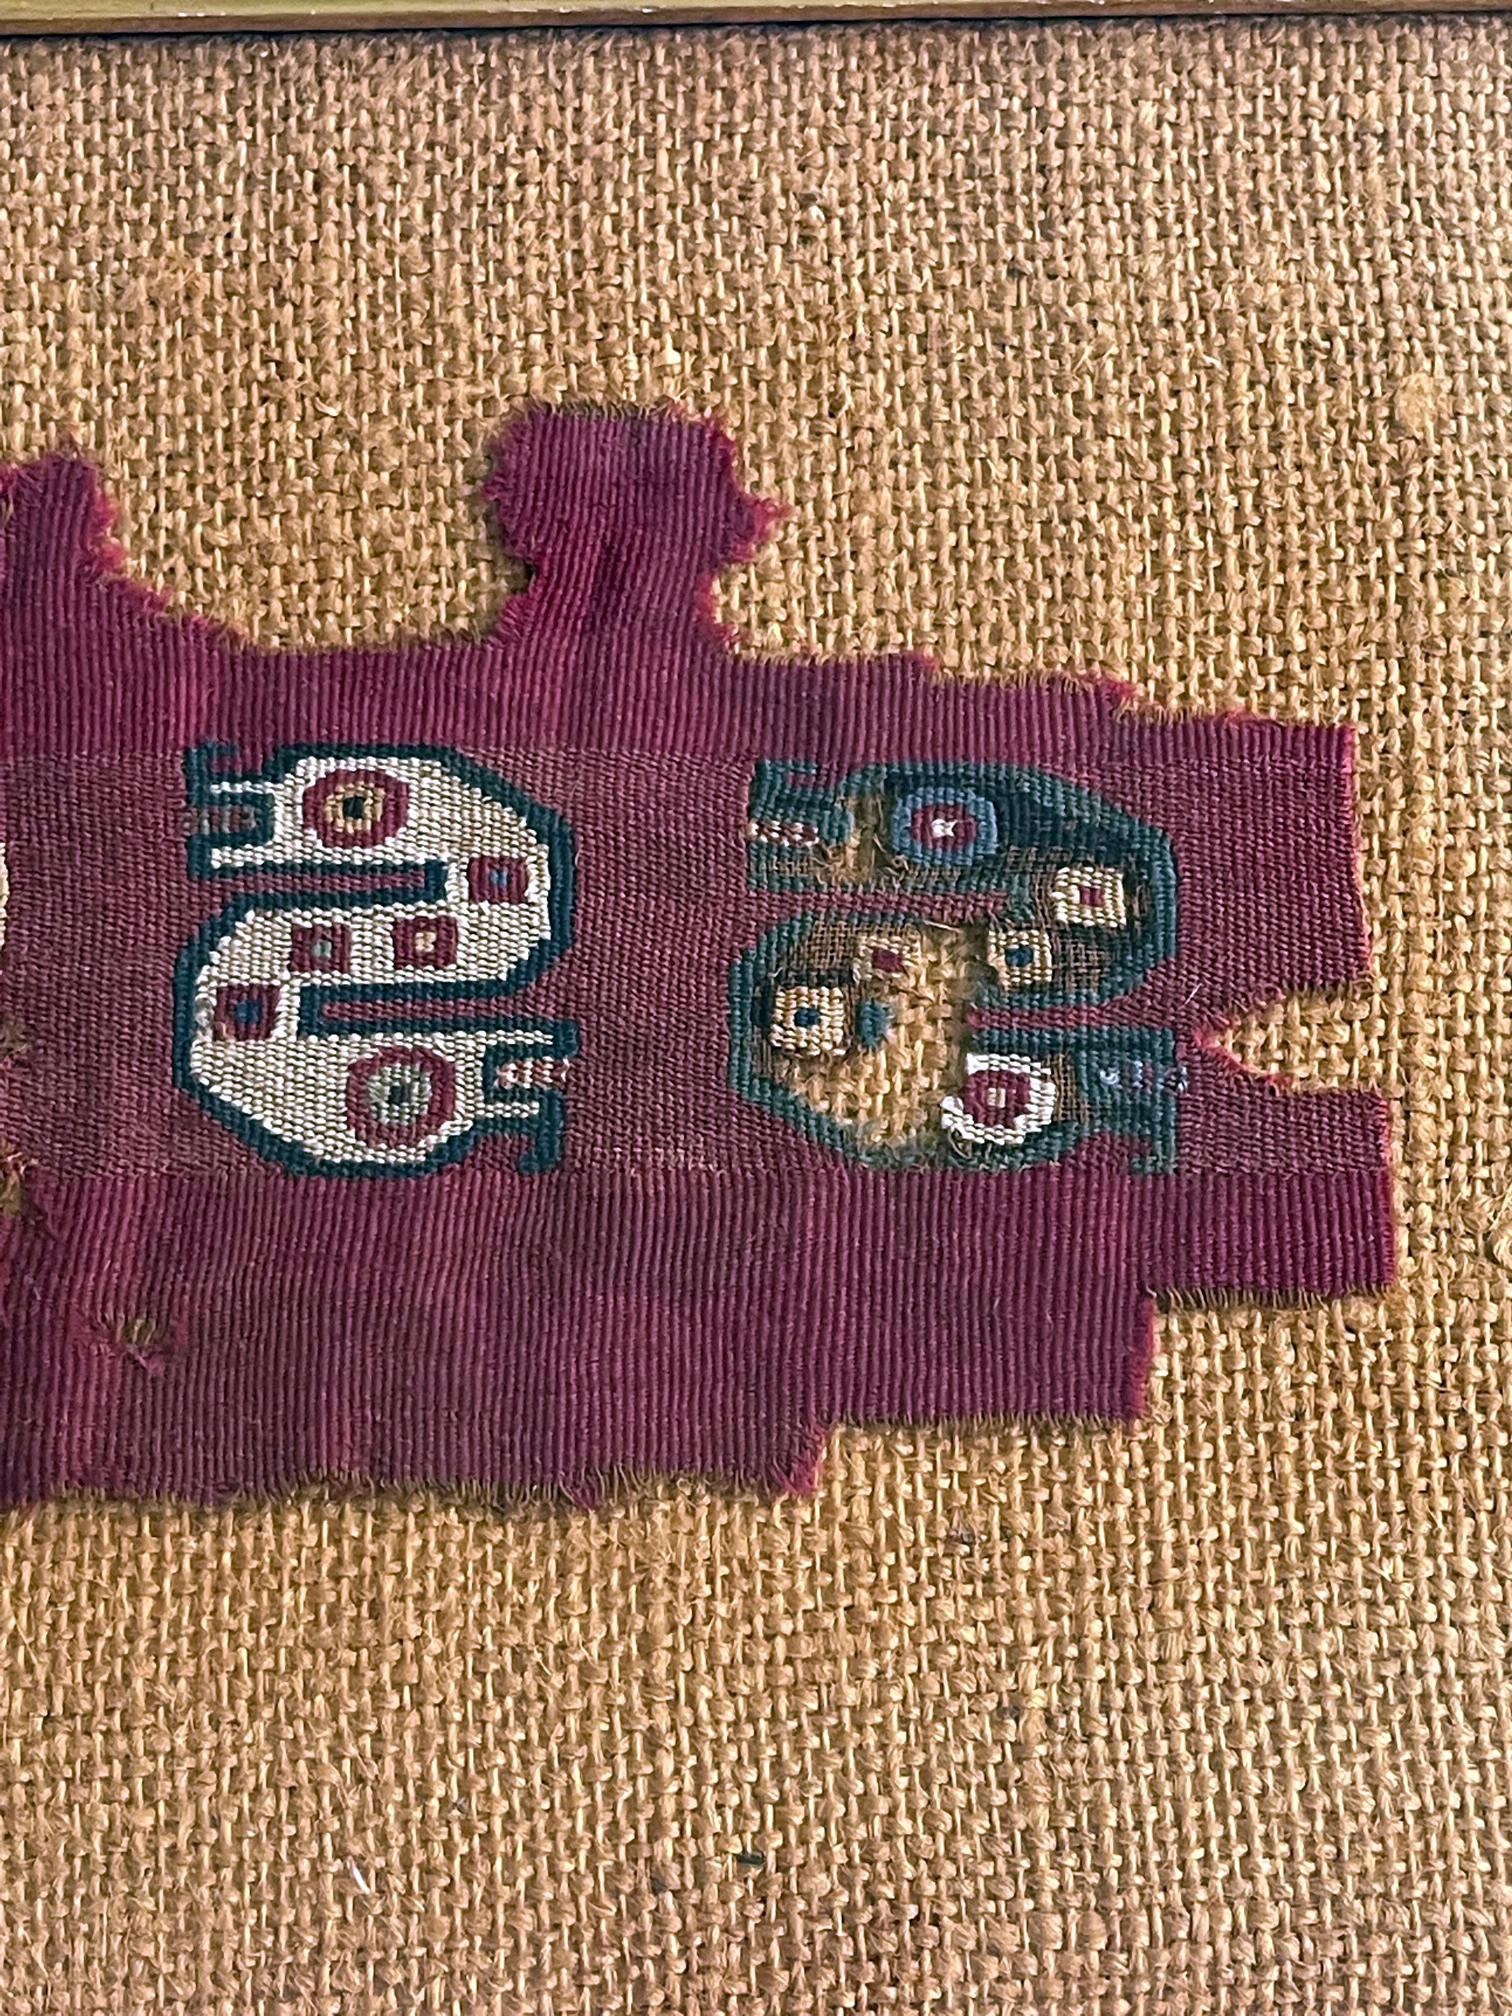 18th Century and Earlier Two Framed Pre-Columbian Textile Fragment Chancay Culture Peru For Sale